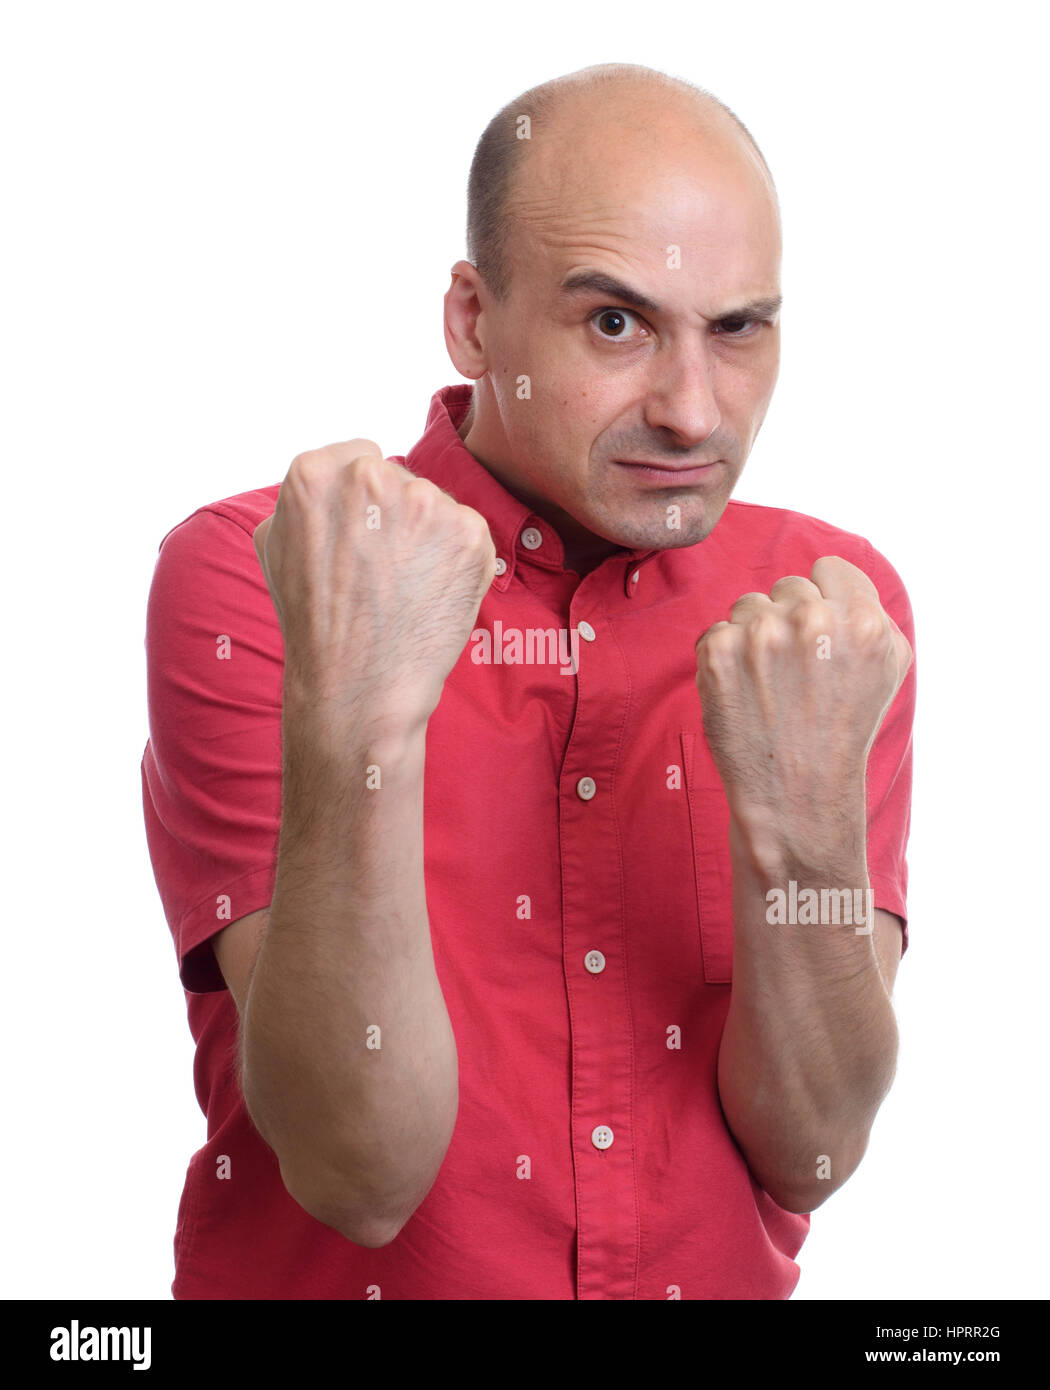 Angry bald man ready for a fight. Isolated on white background Stock Photo